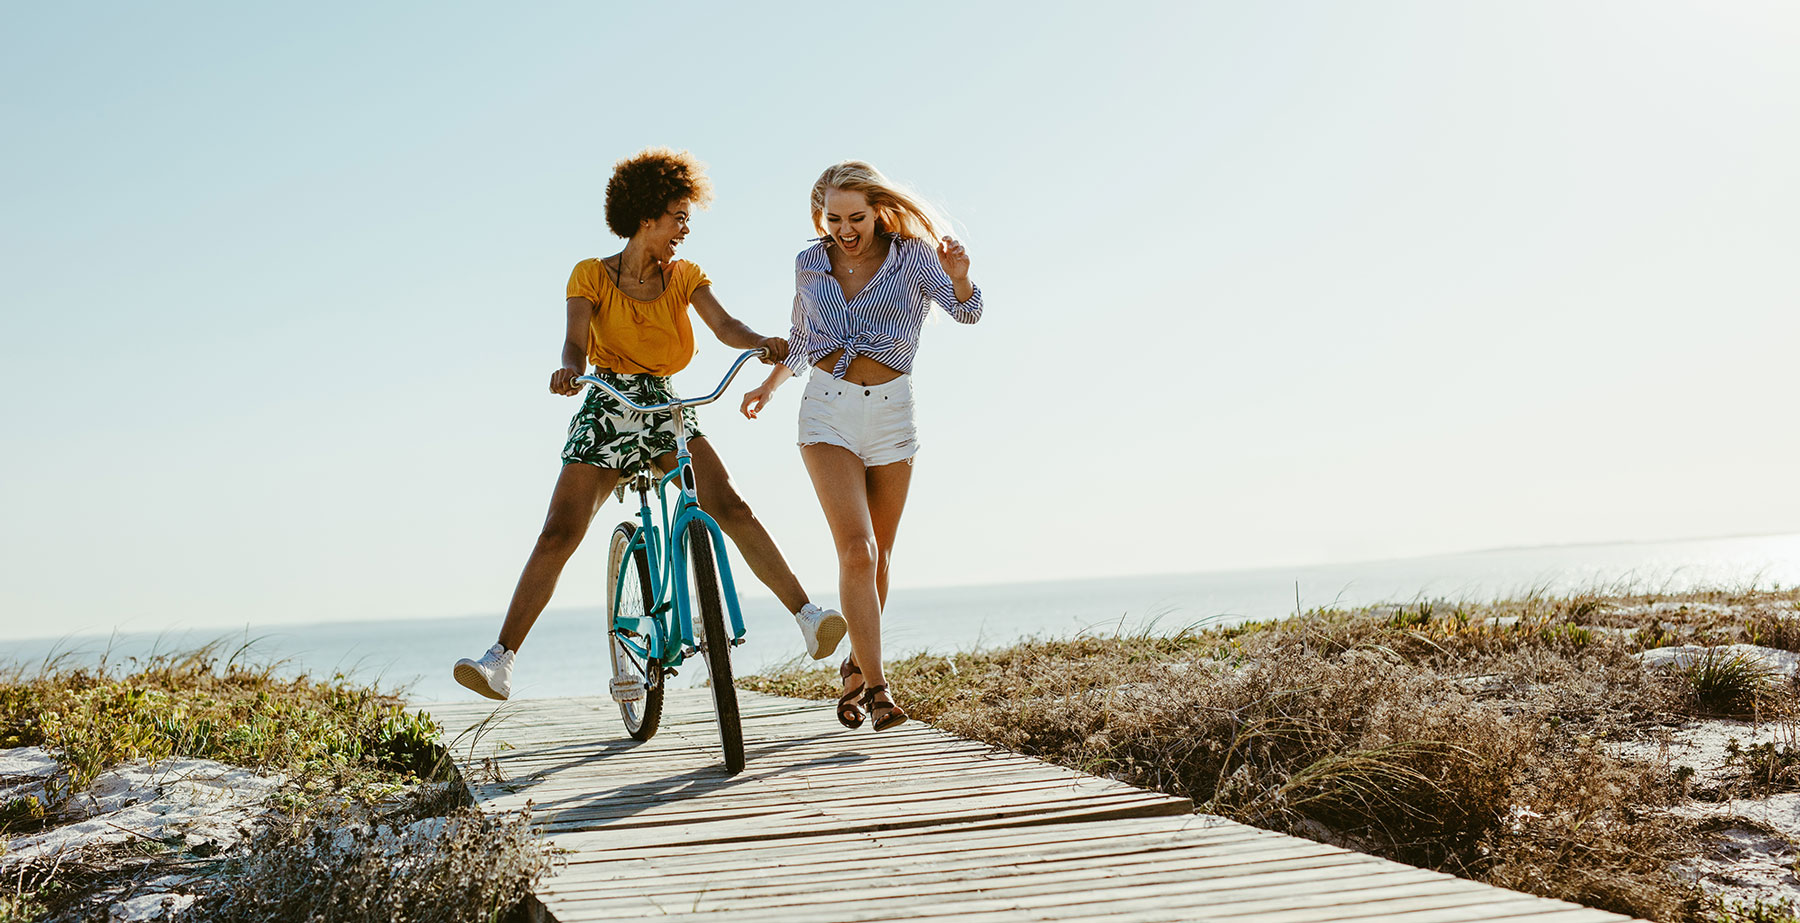 Woman riding bicycle on boardwalk next to another woman